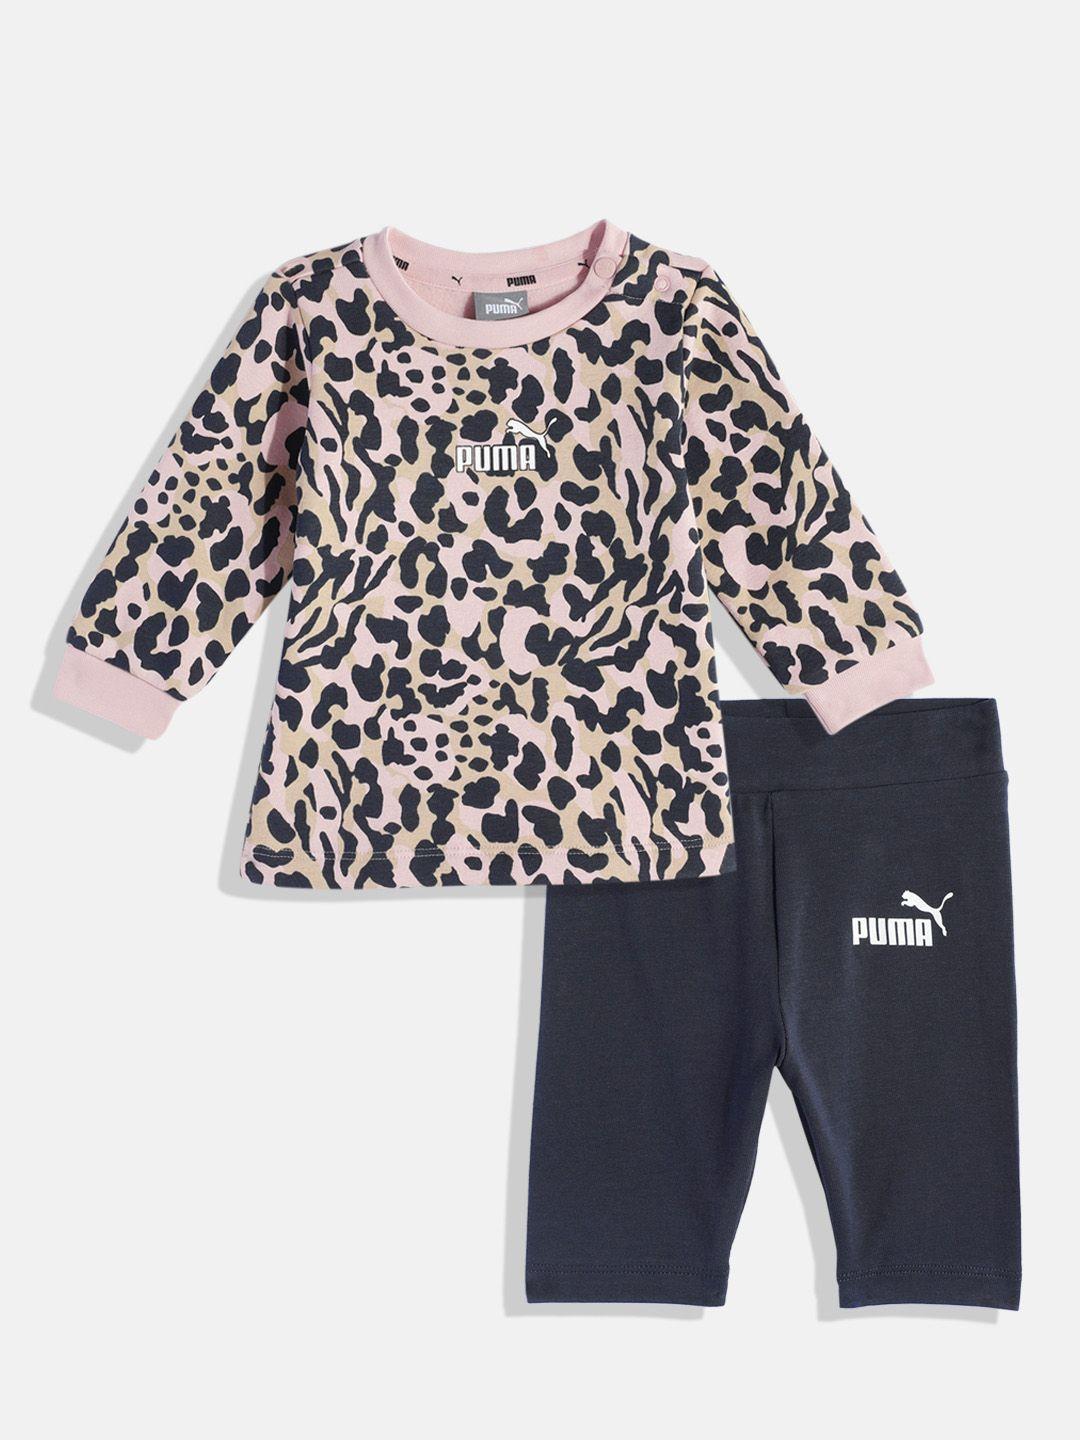 puma infant nude pink camouflage printed t-shirt with navy blue shorts